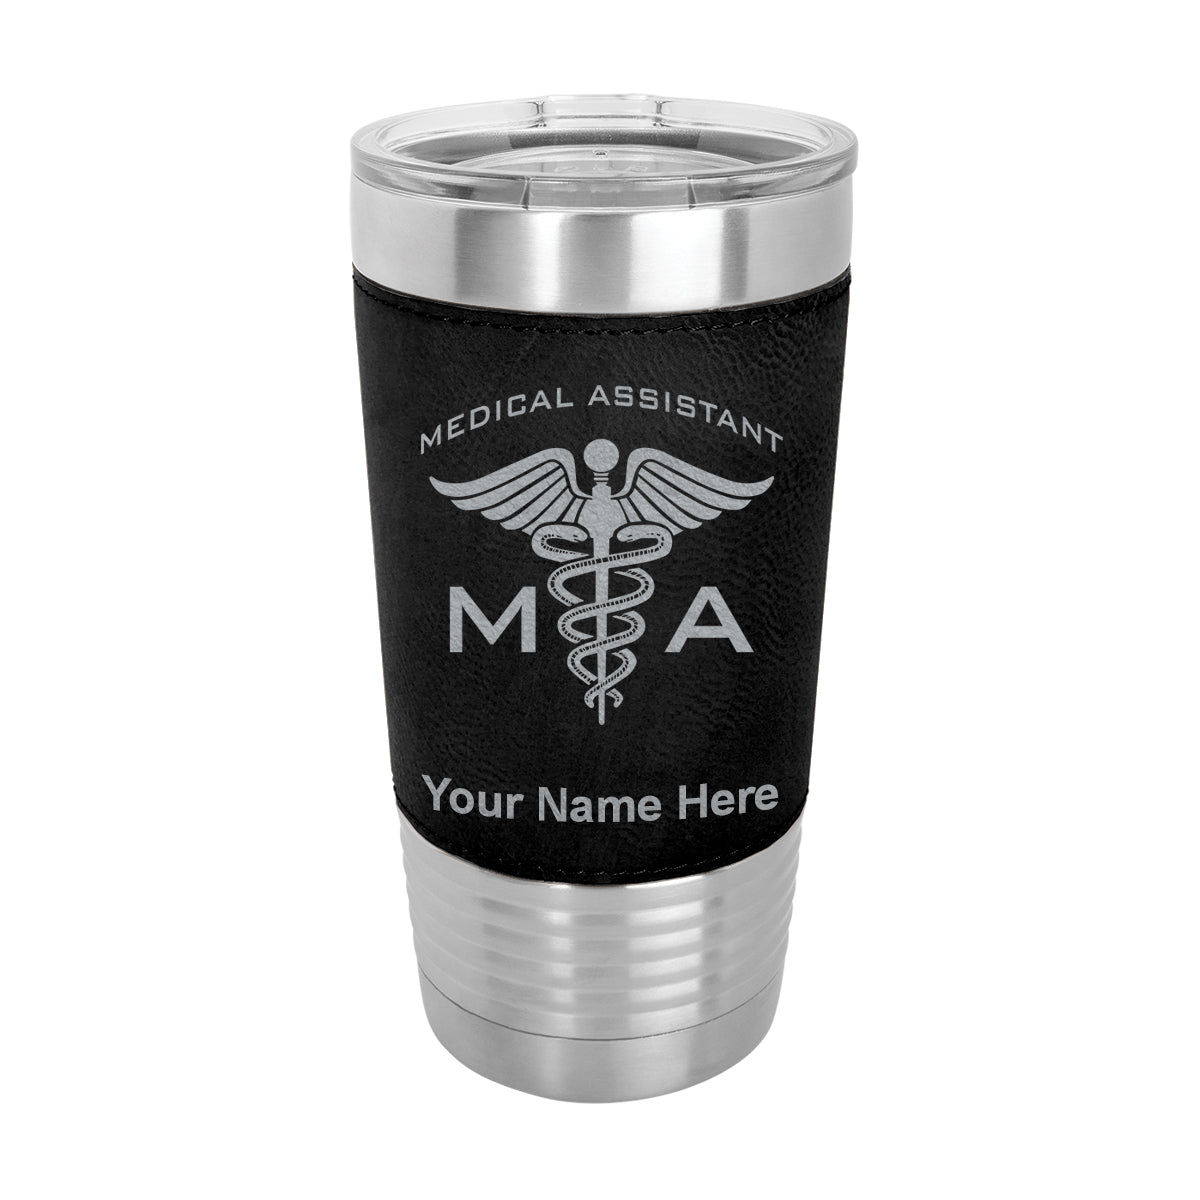 20oz Faux Leather Tumbler Mug, MA Medical Assistant, Personalized Engraving Included - LaserGram Custom Engraved Gifts